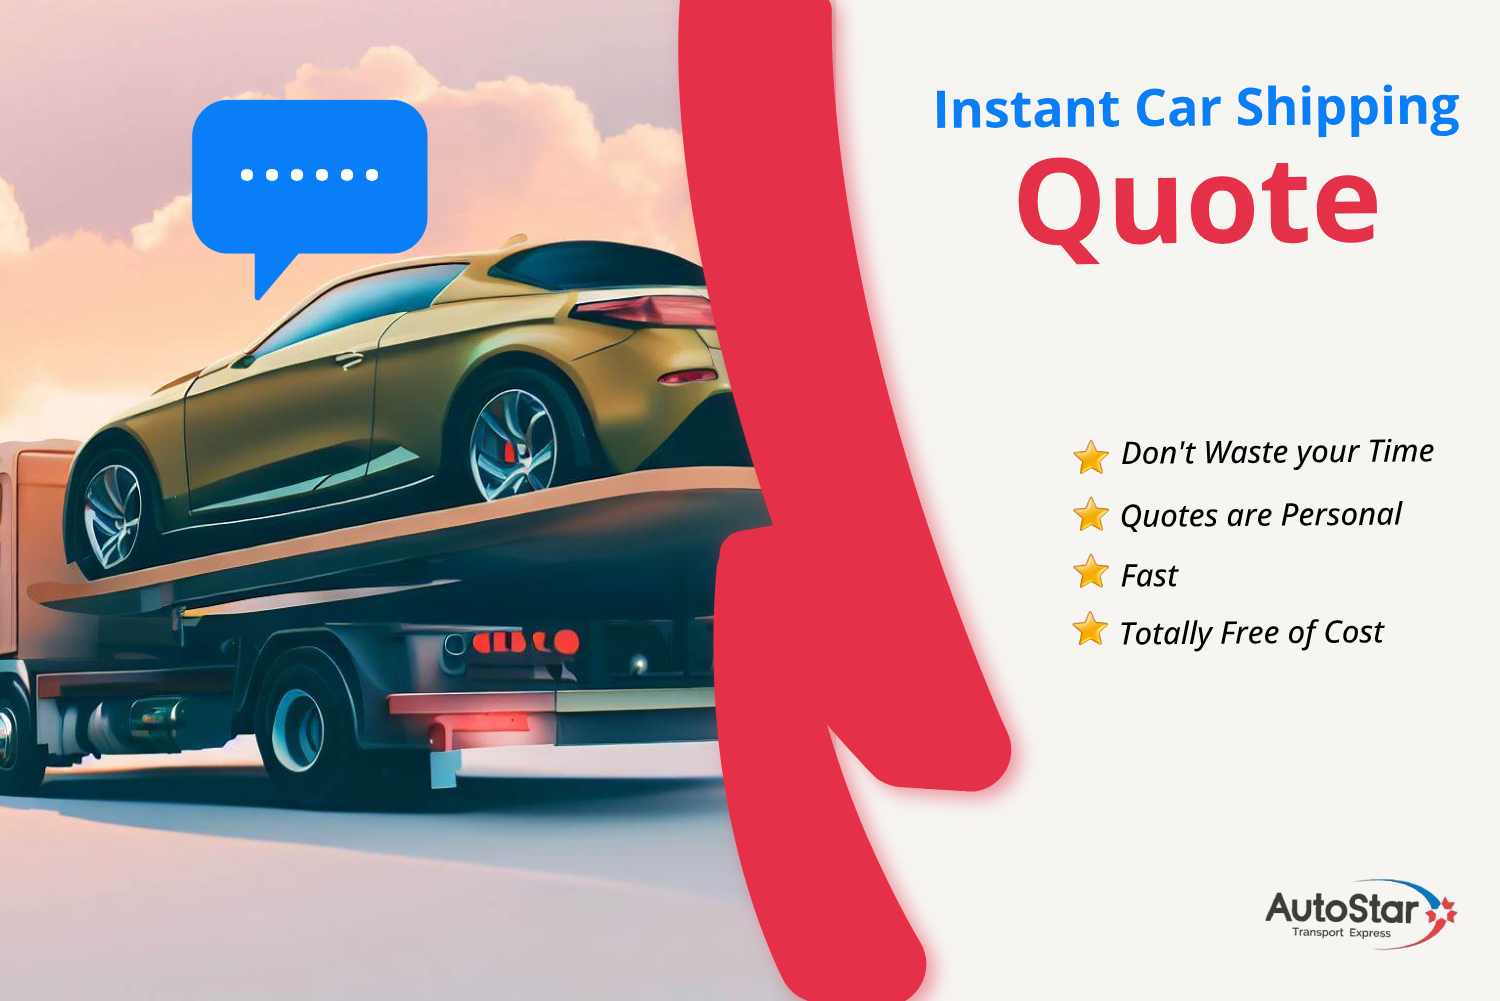 Request a free car shipping quote